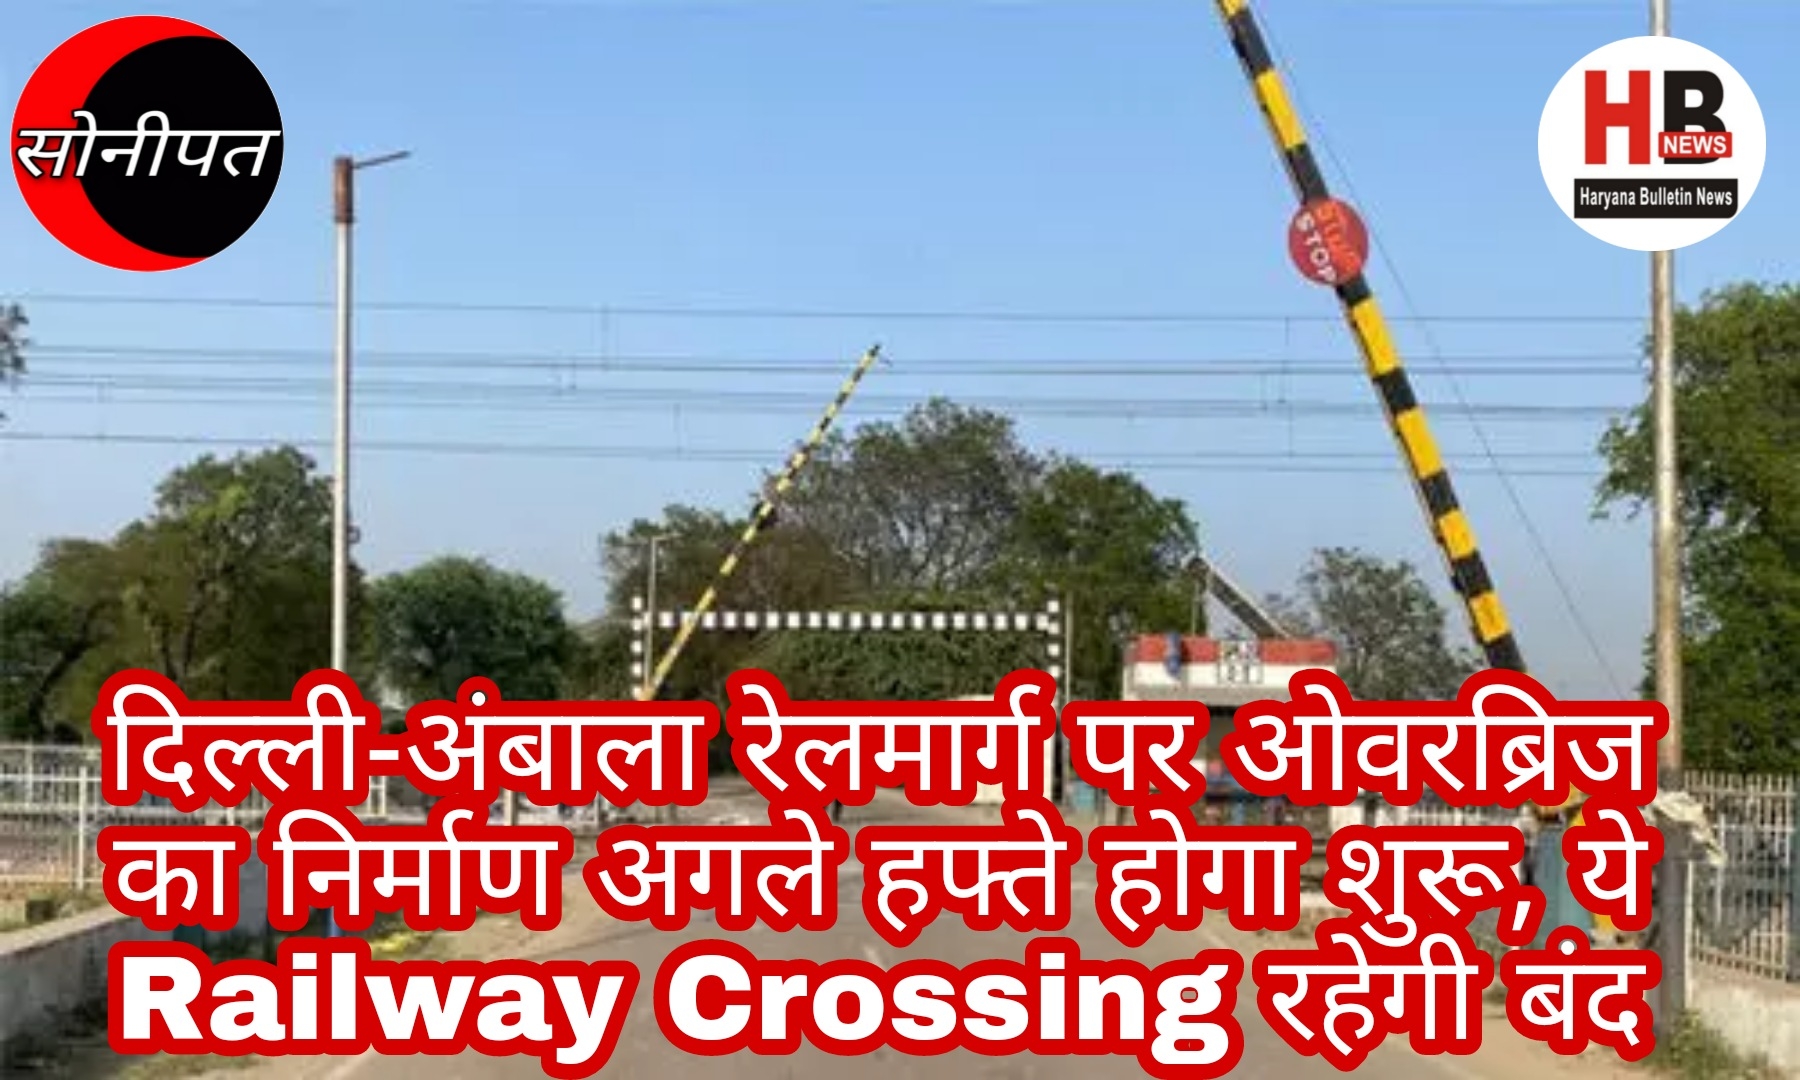 Construction of overbridge on Delhi-Ambala rail route will start next week, this railway crossing will remain closed